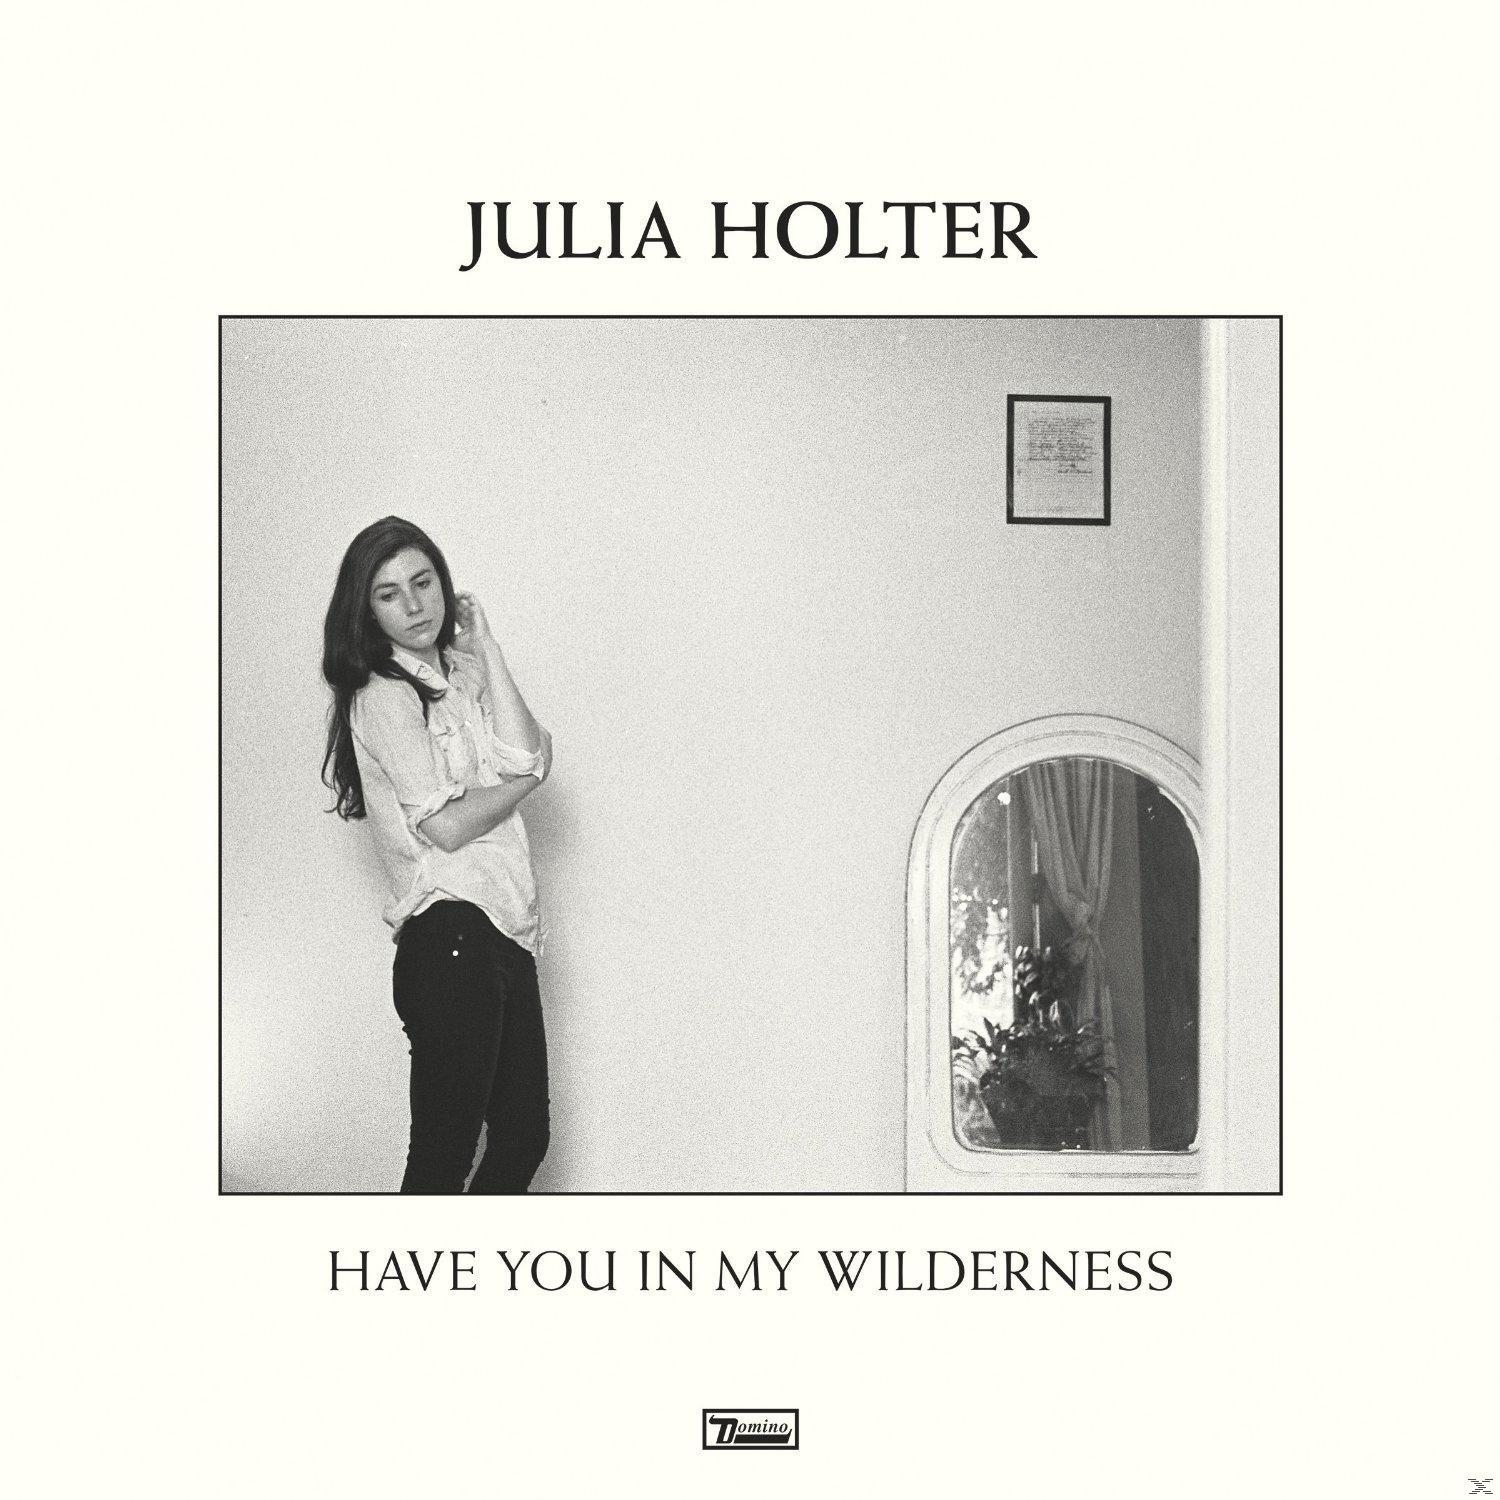 Julia Holter - Have You Wilderness (CD) In - My